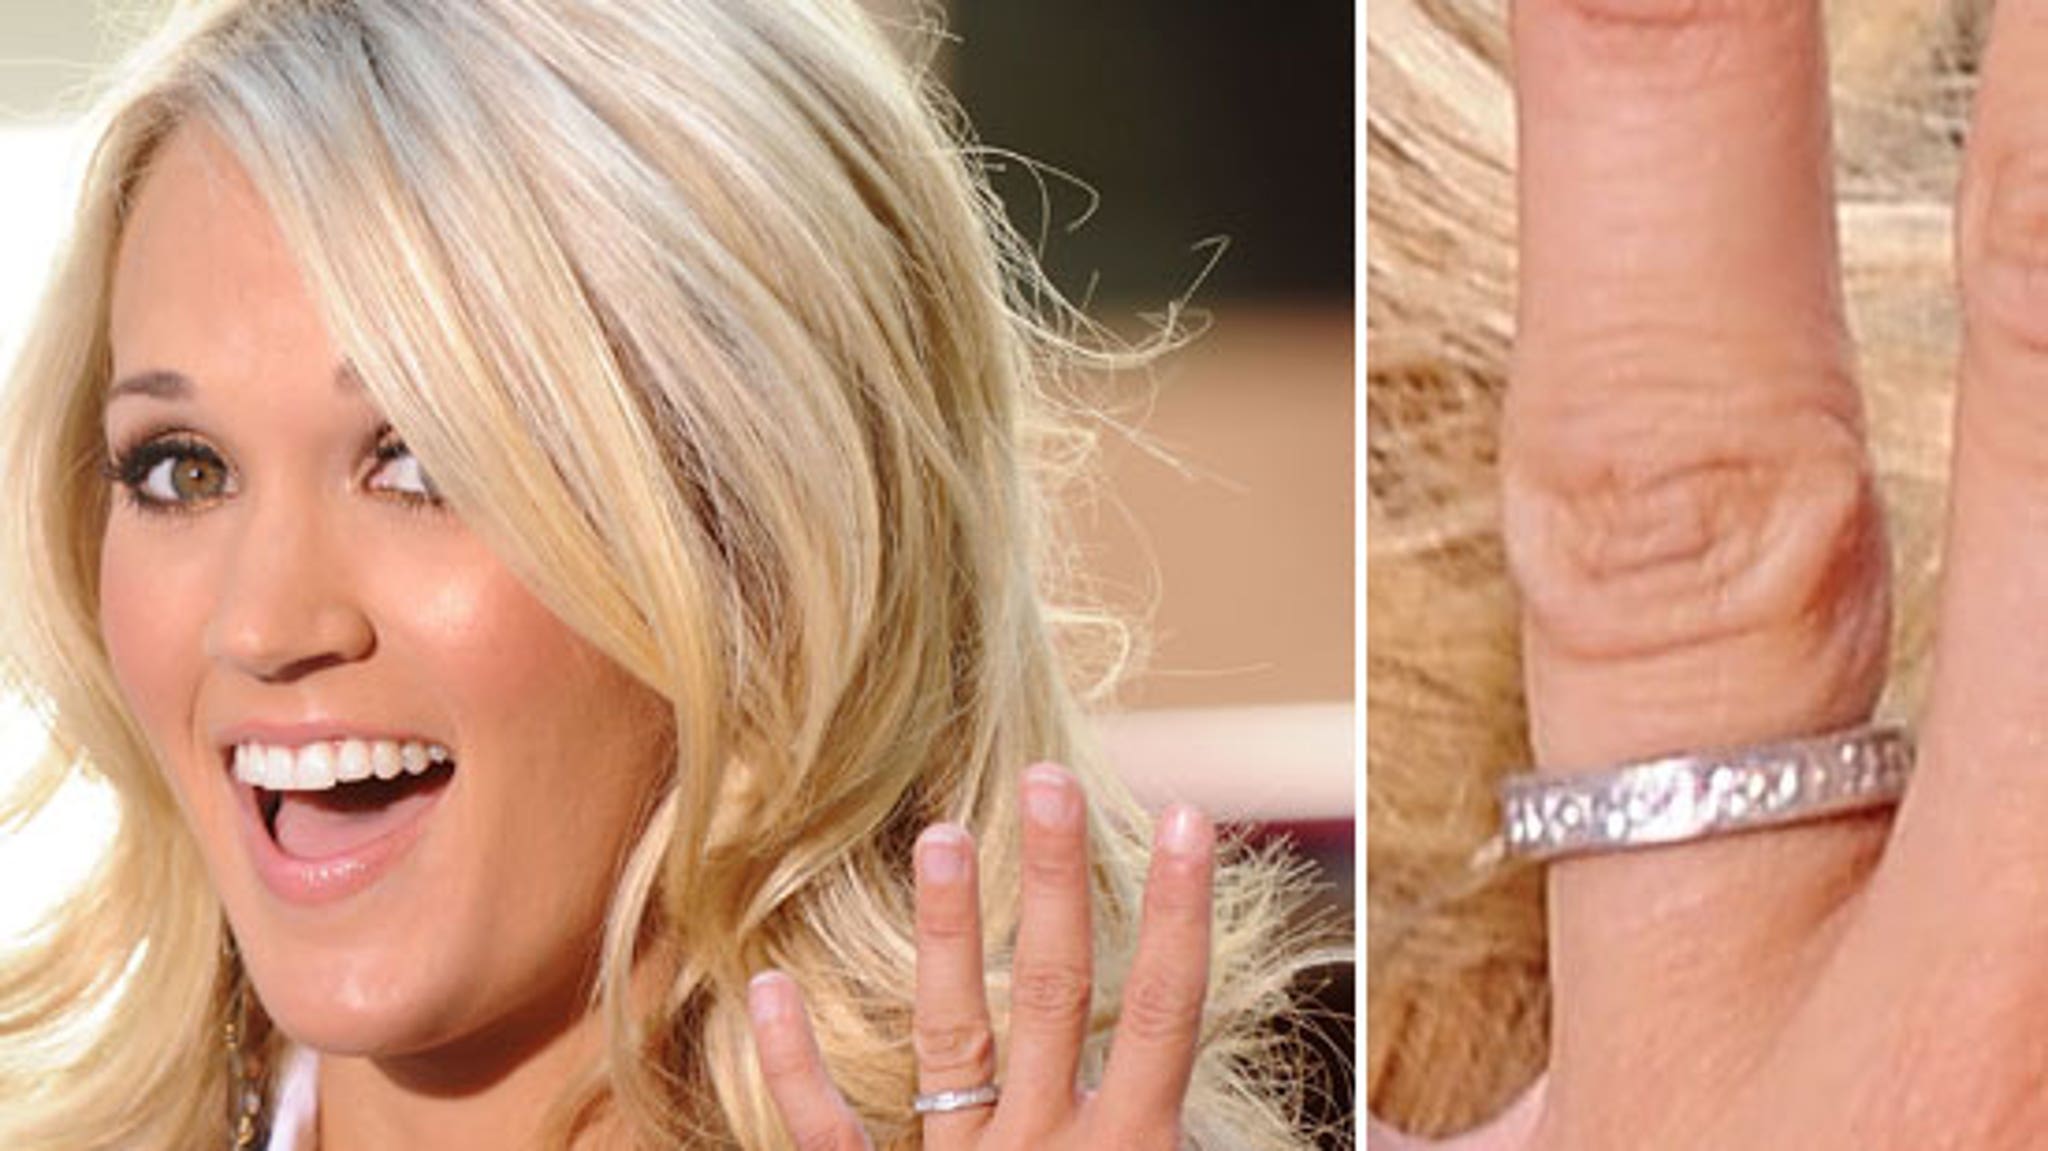 Carrie Underwood Shows Off New Wedding Ring.